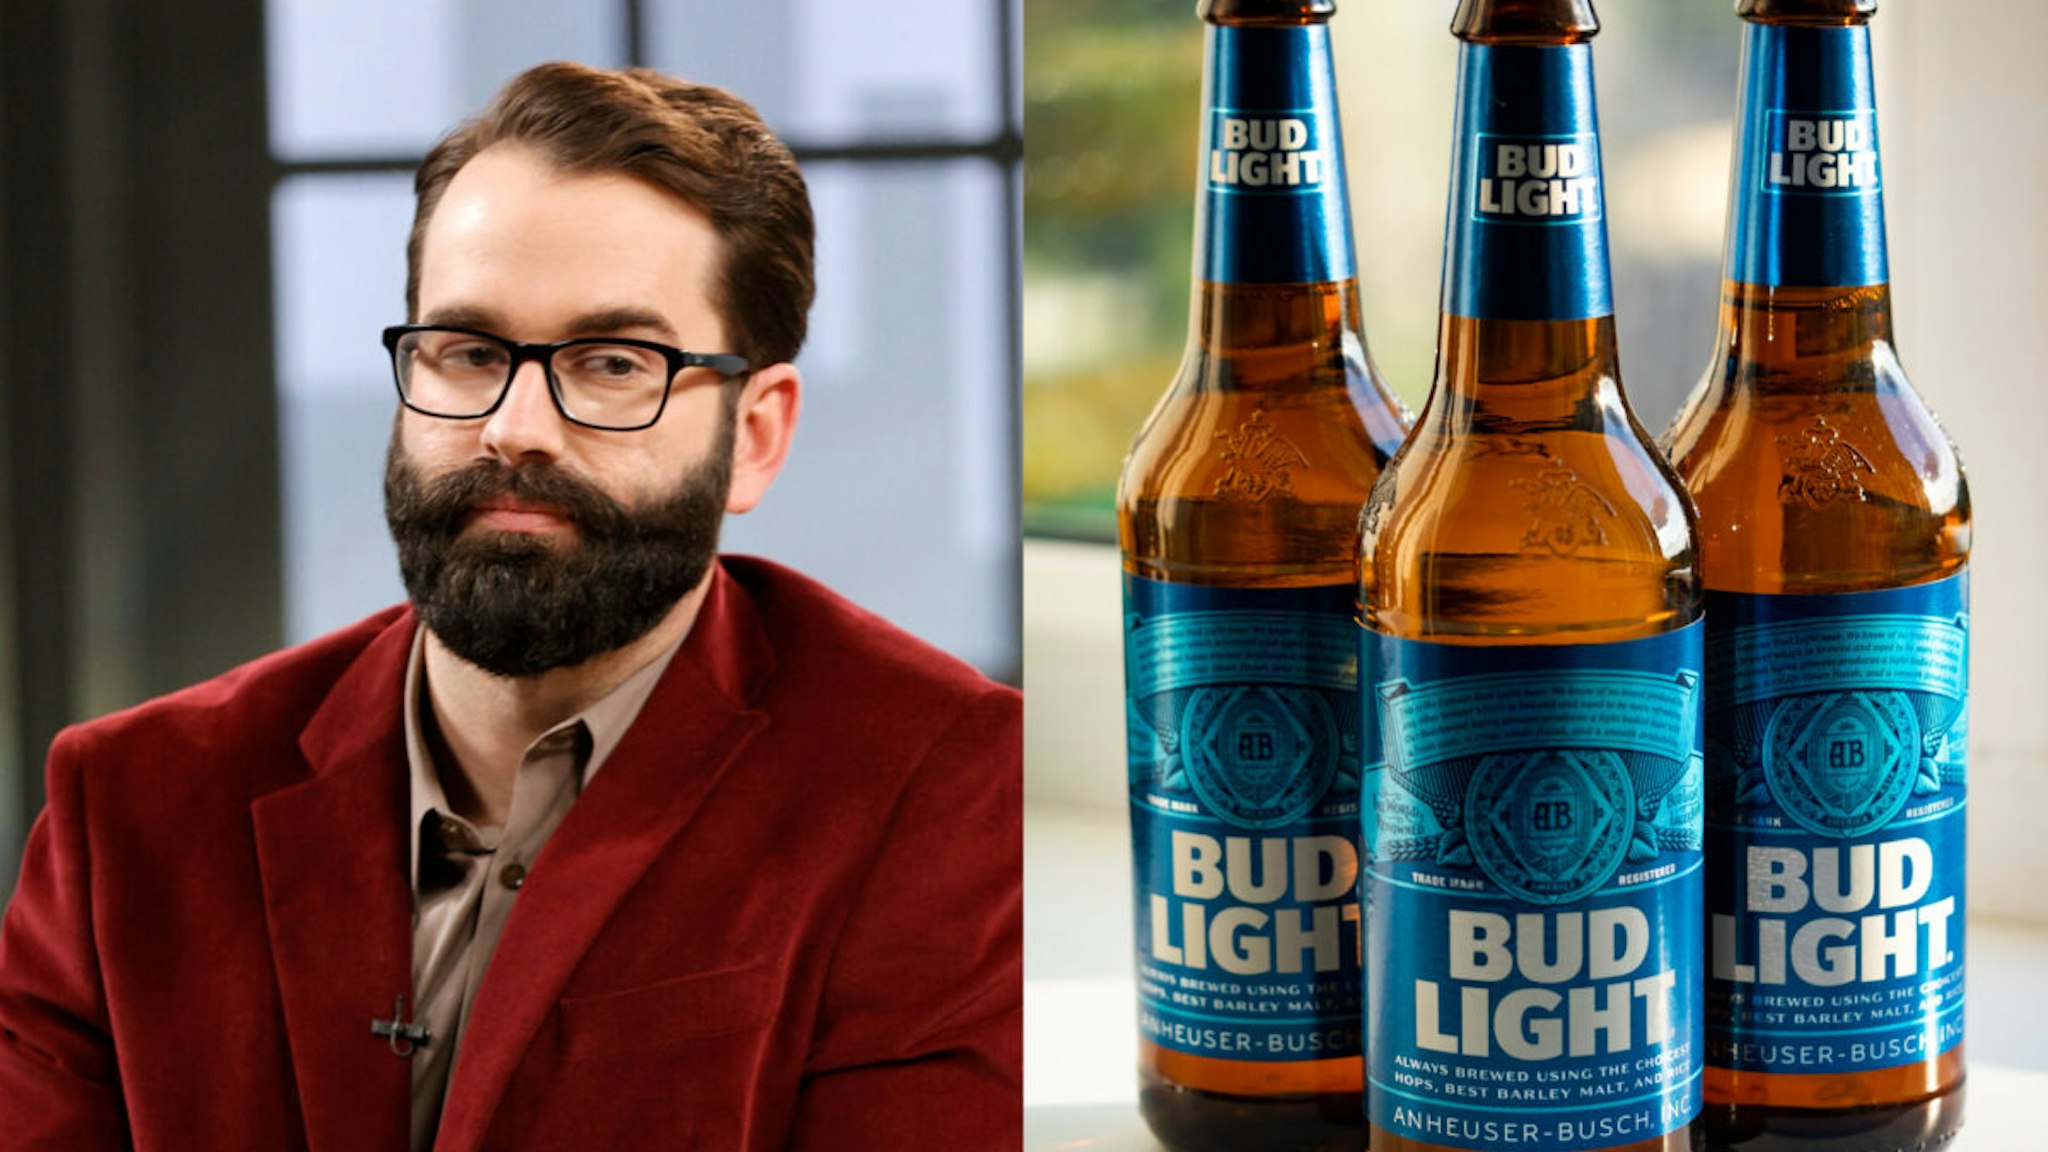 NASHVILLE, TENNESSEE - MARCH 31: Matt Walsh is seen on set of "Candace" on March 31, 2021 in Nashville, Tennessee. The show will air on Friday, April 2, 2021./UKRAINE - 2021/08/27: In this photo illustration, the Bud Light beer bottles seen displayed in a store.